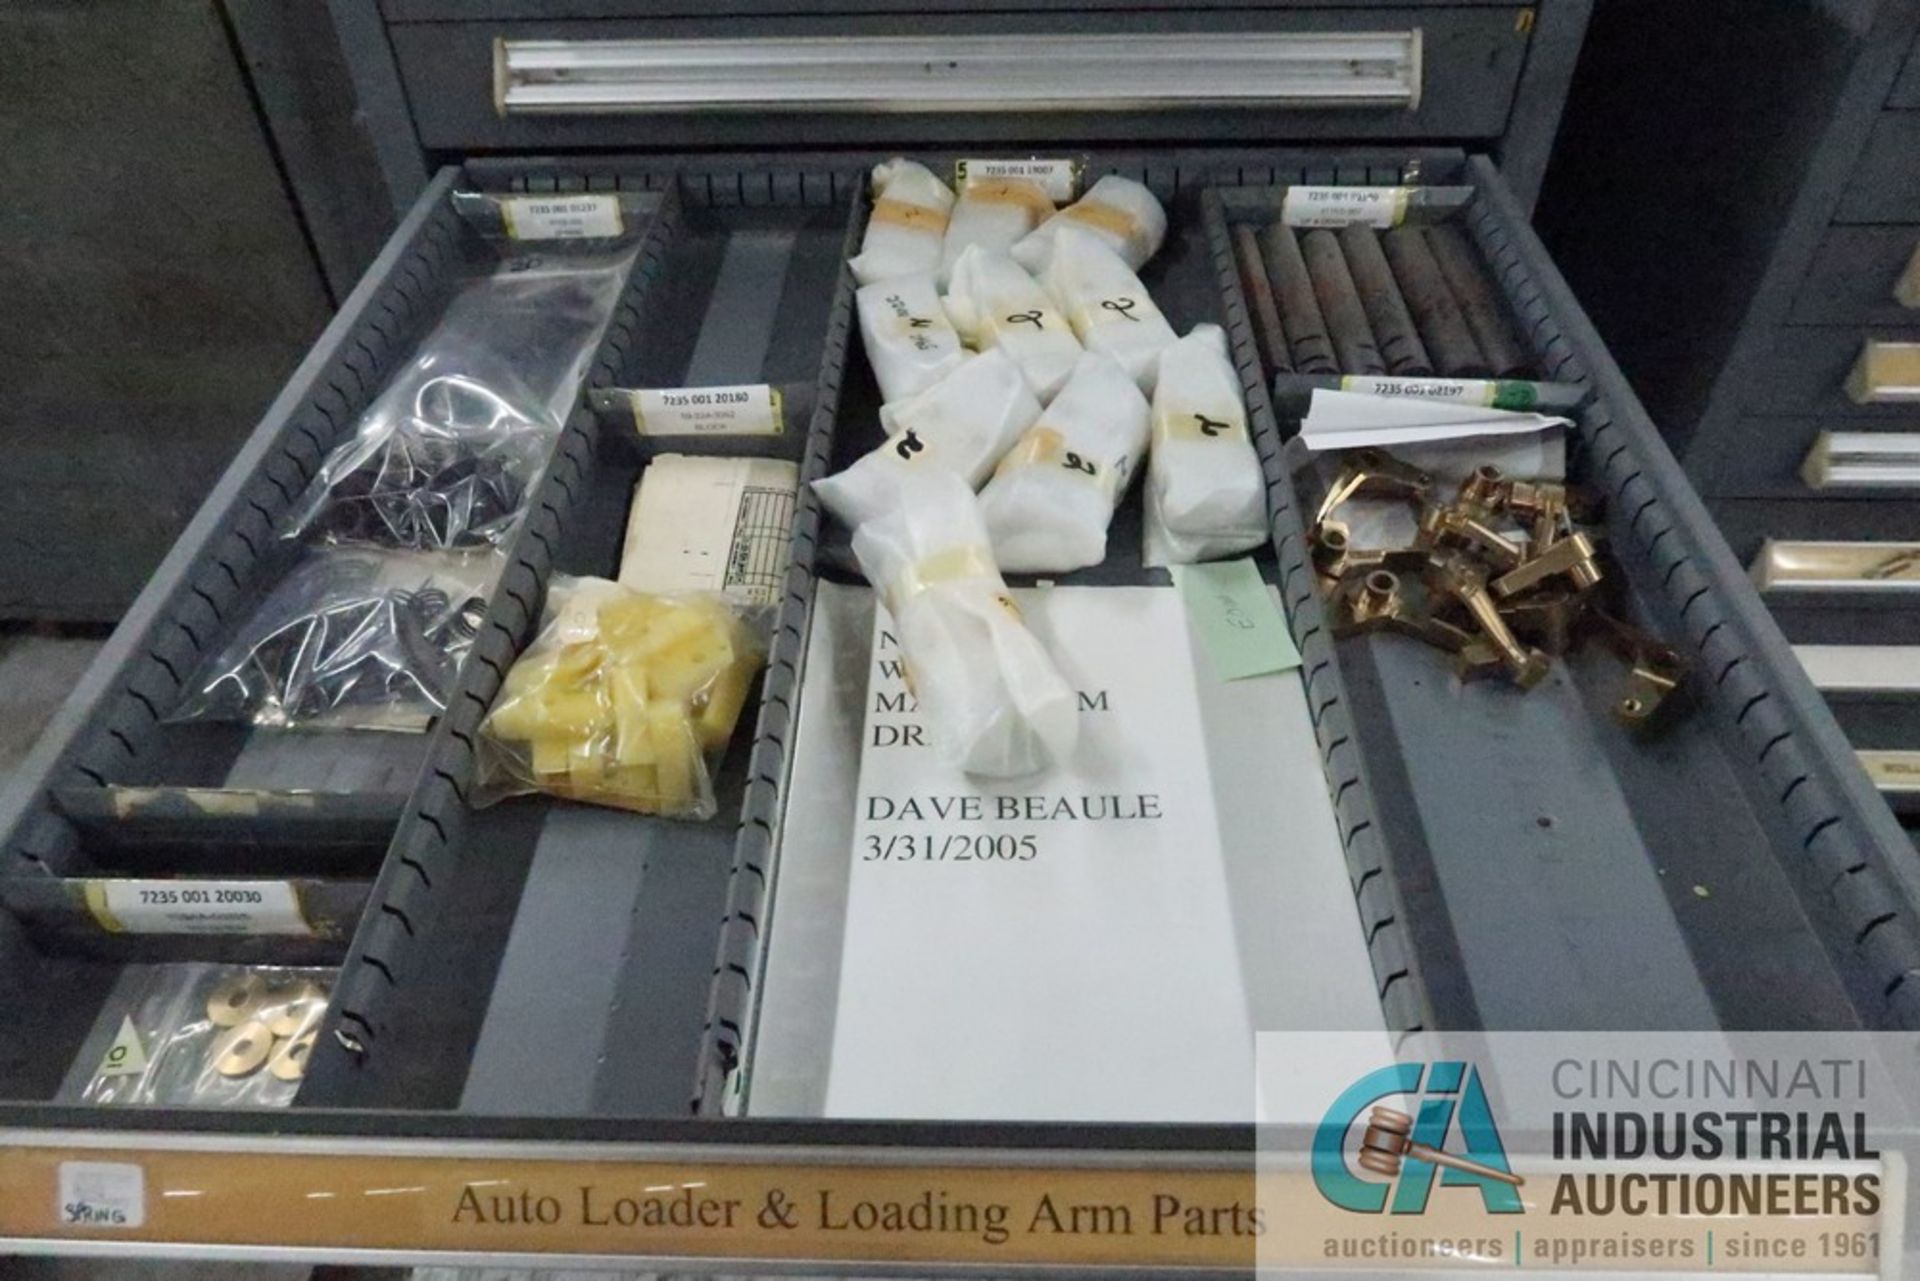 11-DRAWER VIDMAR CABINET WITH CONTENTS INCLUDING MISCELLANEOUS LOADER ARM PARTS, TURRET PARTS, - Image 2 of 7